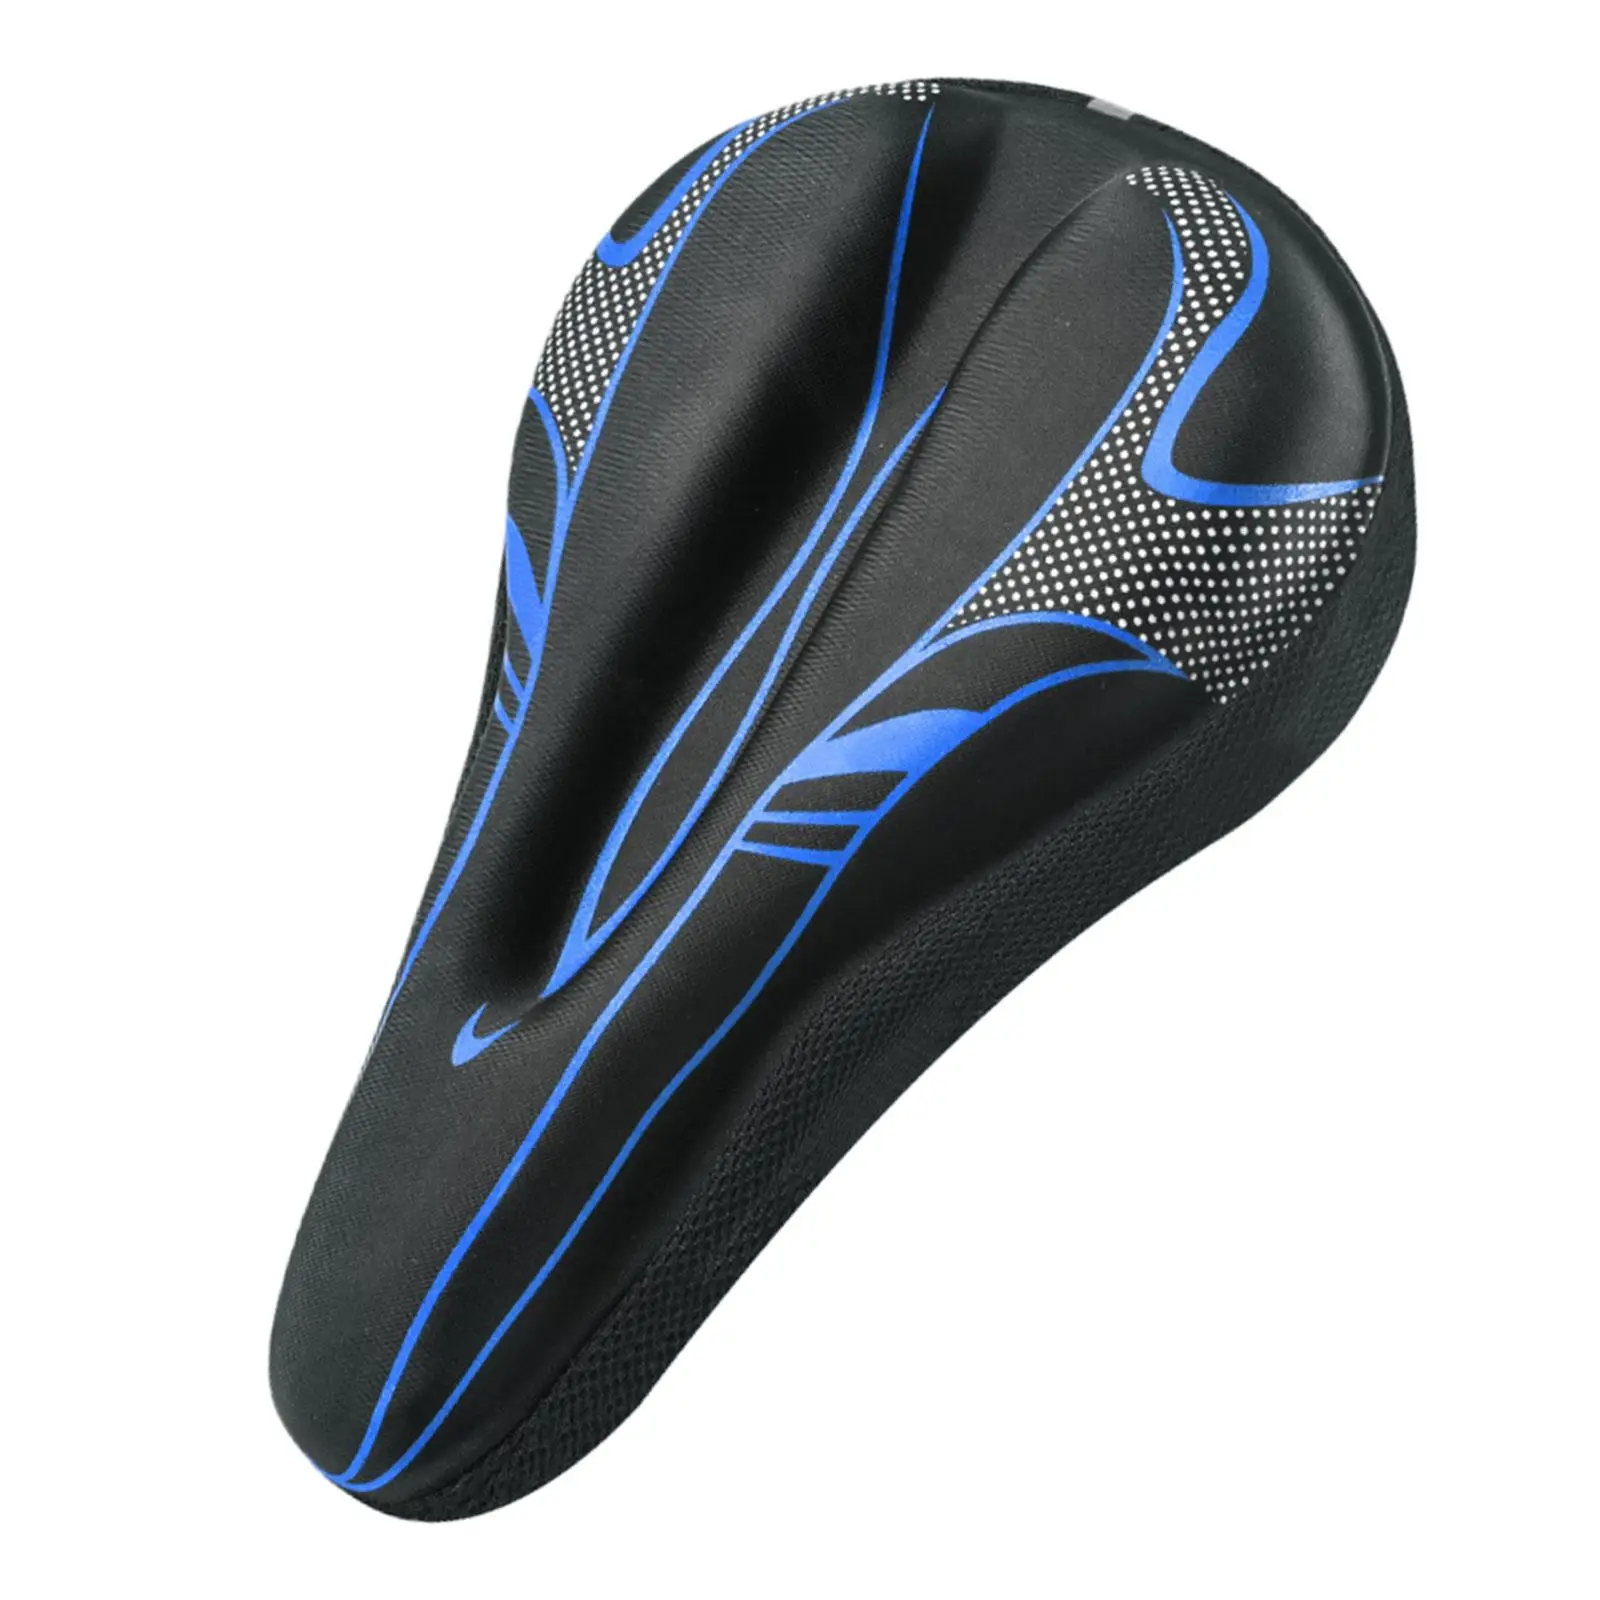 Bike Saddle Cover Men Women Seat Easy to Install Cushion Comfortable Wear Resistant with Drawstring MTB Bicycle Seat Cushion